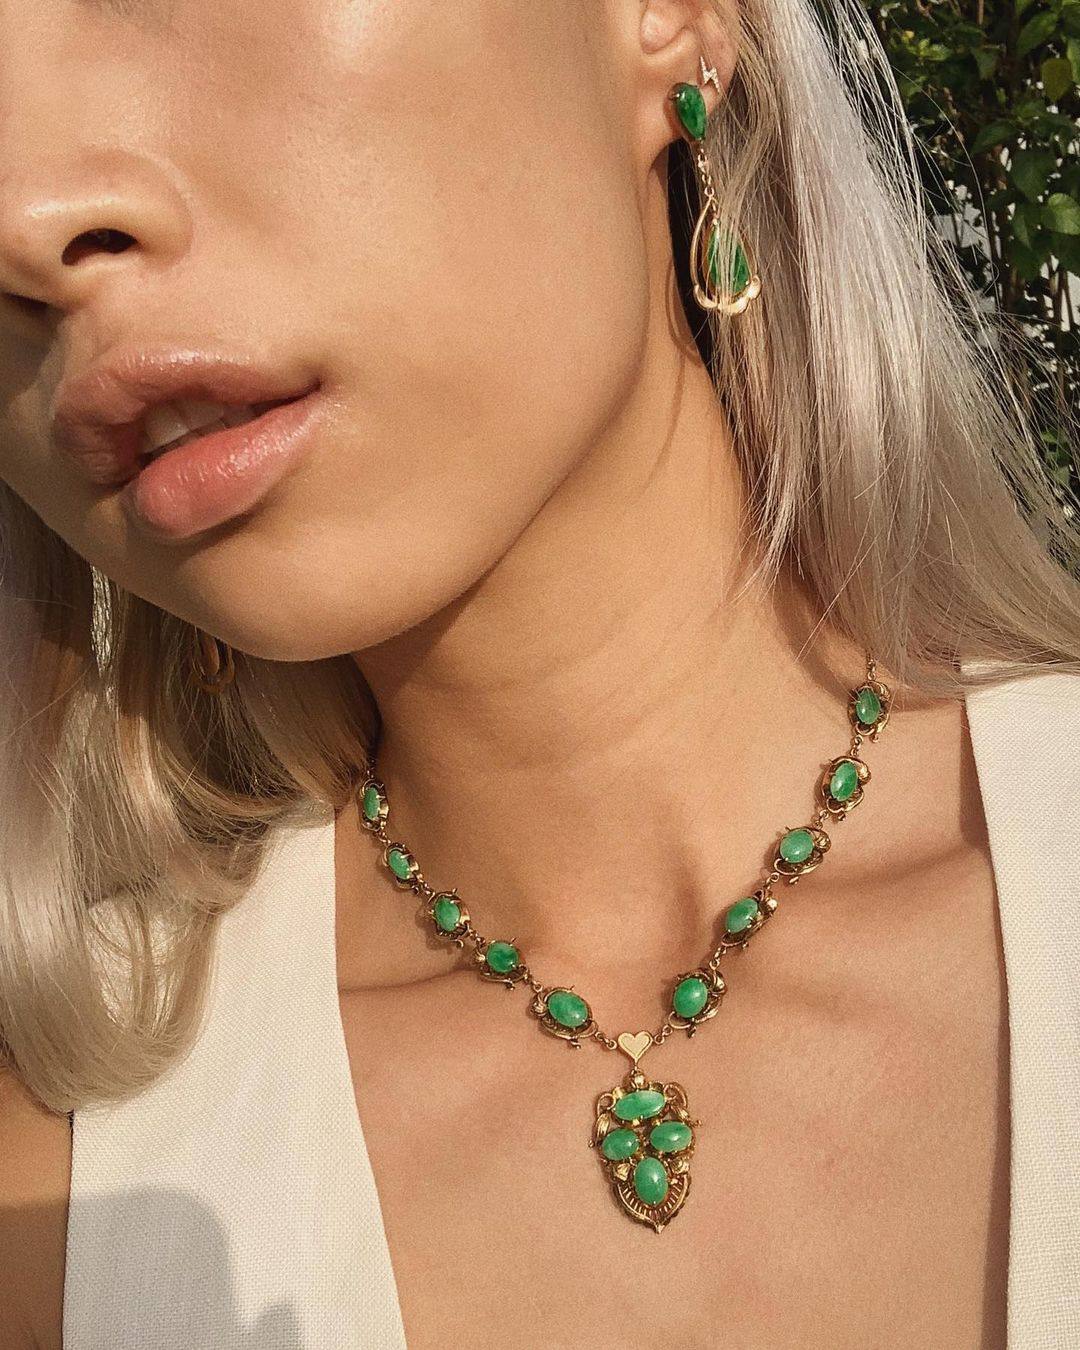 Editor and influencer Dale Arden Chong in jade jewellery. Photo: @dalearden/Instagram